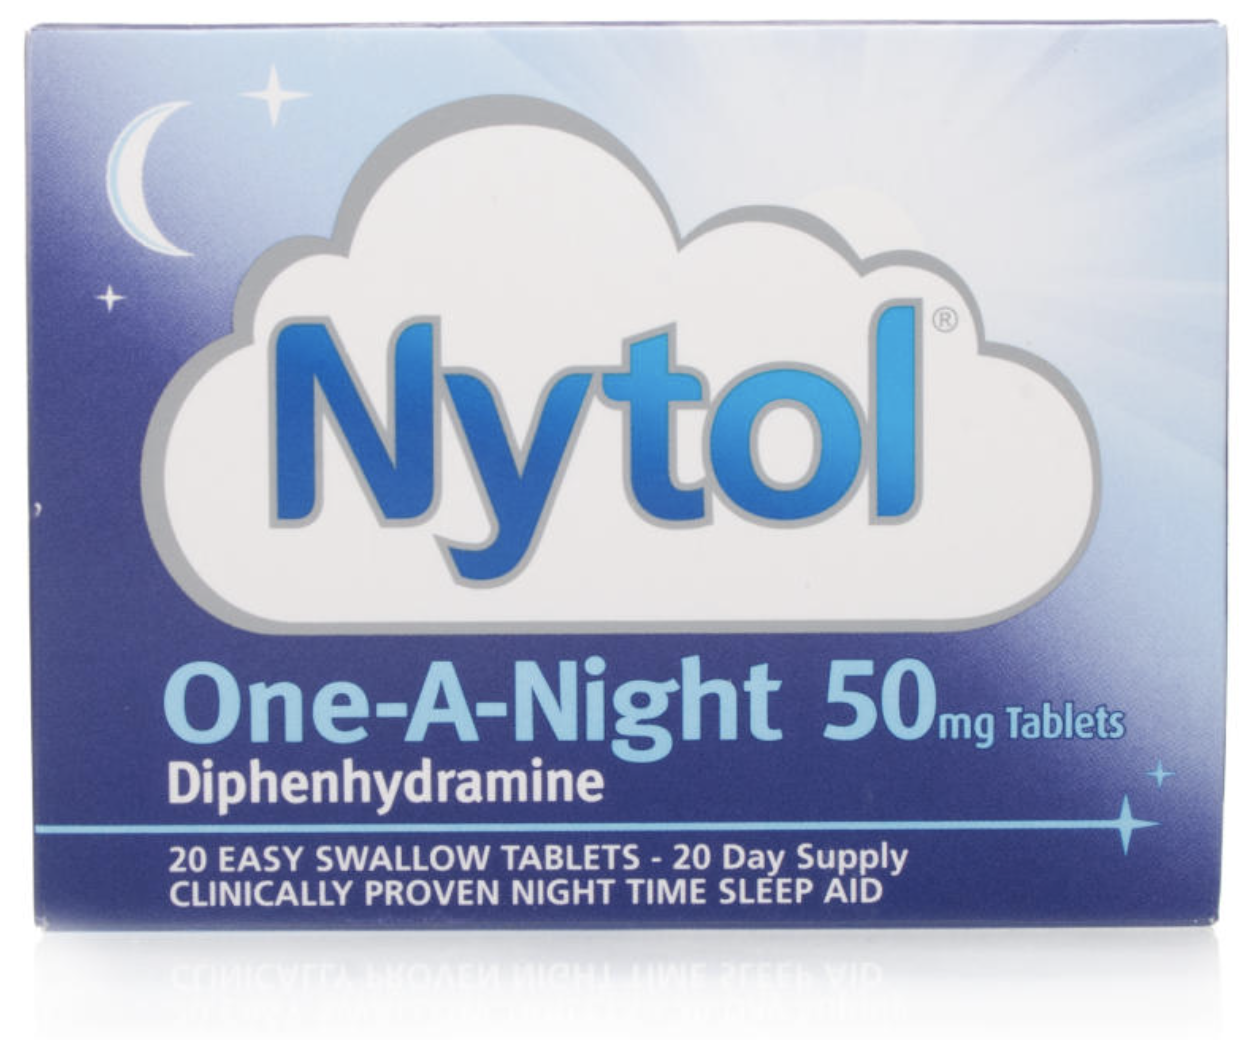 Nytol One-A-Night 50mg Tablets